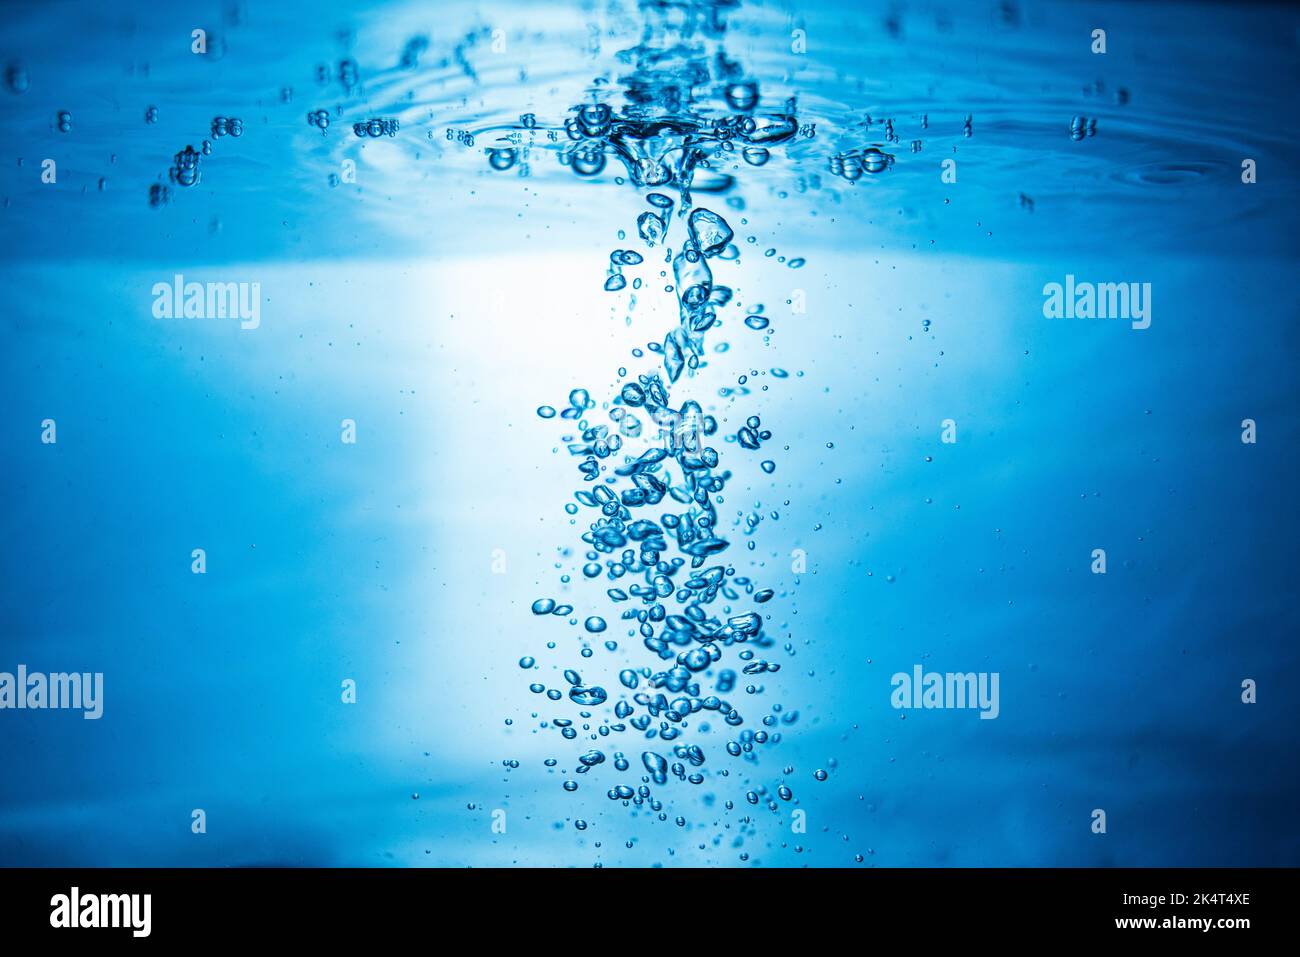 An abstract background created by air bubbles in water under blue lighting. Stock Photo